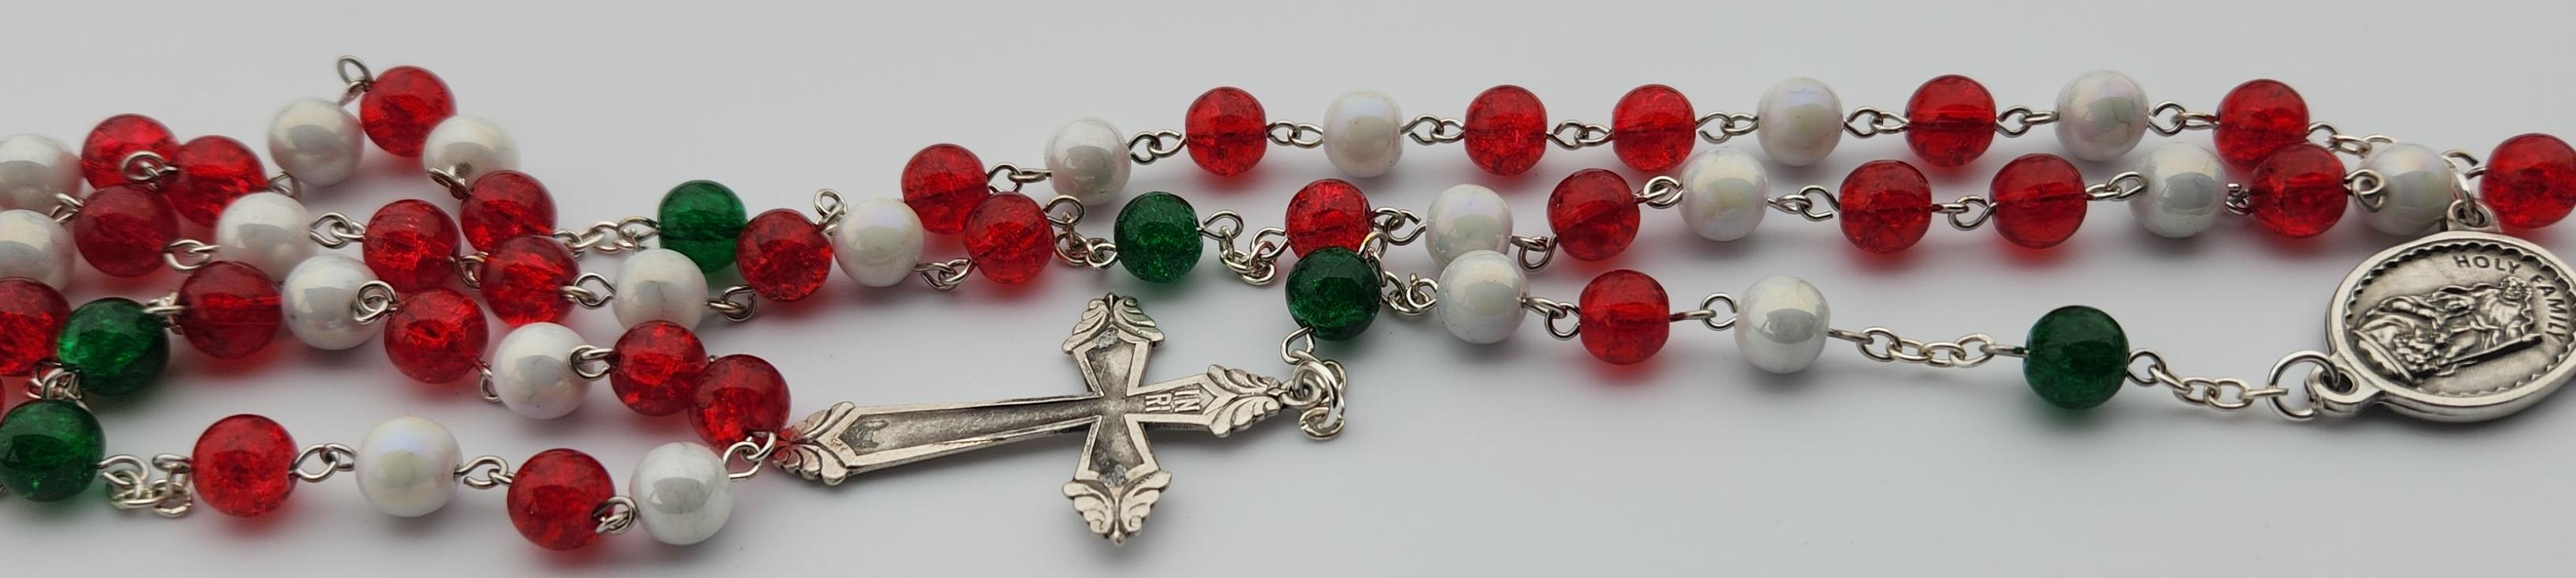 more info about rosary #63